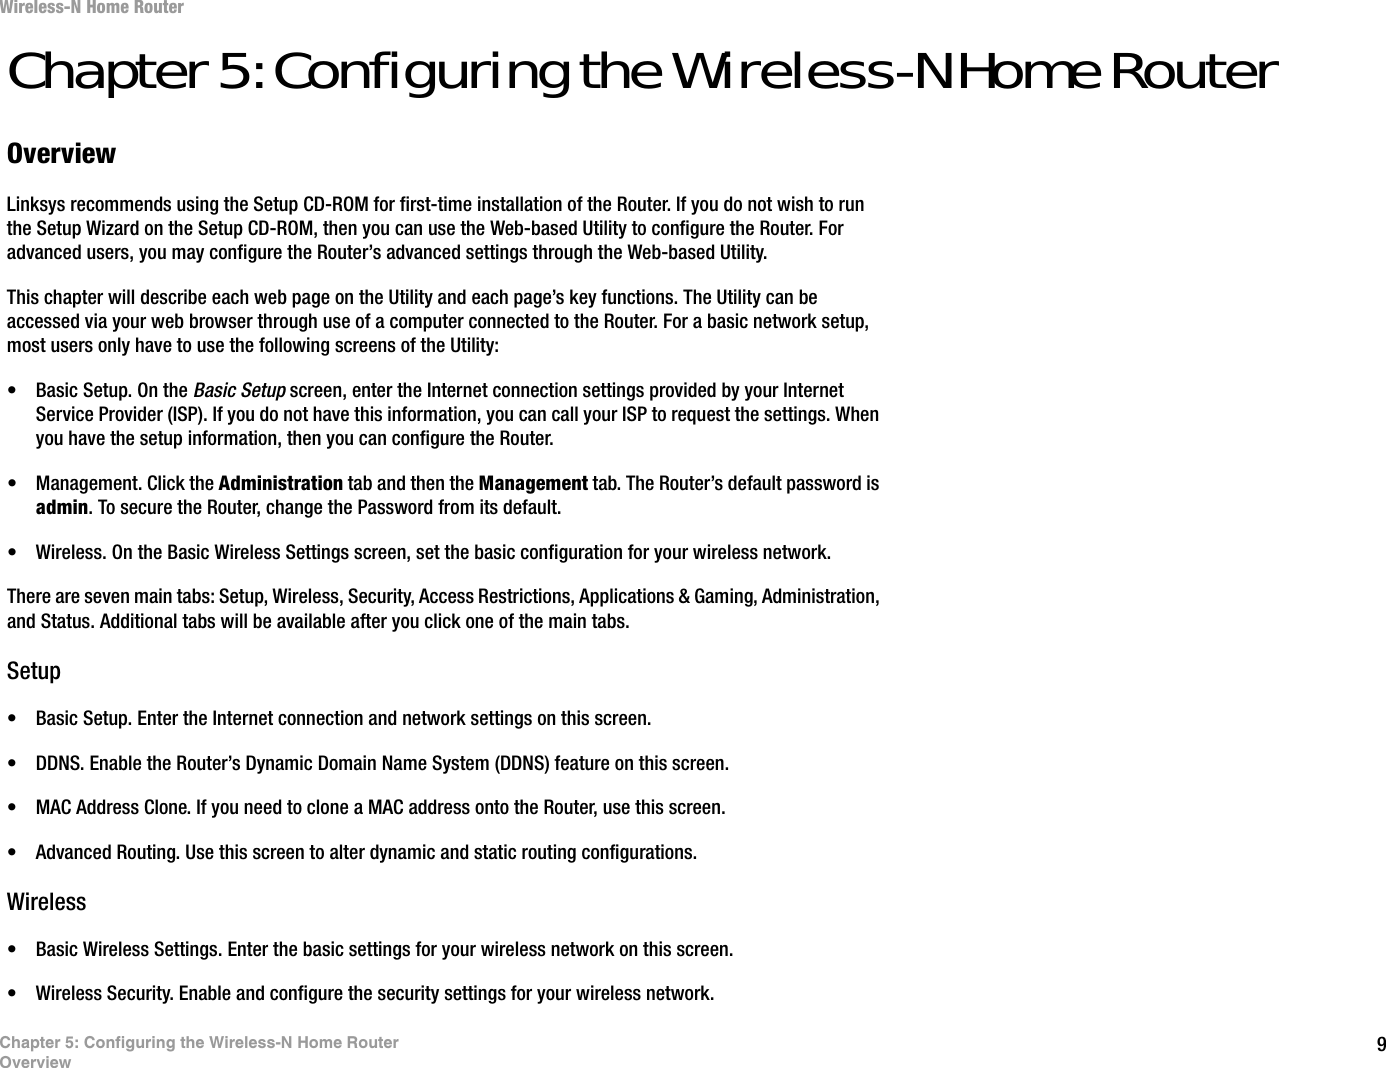 9Chapter 5: Configuring the Wireless-N Home RouterOverviewWireless-N Home RouterChapter 5: Configuring the Wireless-N Home RouterOverviewLinksys recommends using the Setup CD-ROM for first-time installation of the Router. If you do not wish to run the Setup Wizard on the Setup CD-ROM, then you can use the Web-based Utility to configure the Router. For advanced users, you may configure the Router’s advanced settings through the Web-based Utility.This chapter will describe each web page on the Utility and each page’s key functions. The Utility can be accessed via your web browser through use of a computer connected to the Router. For a basic network setup, most users only have to use the following screens of the Utility:• Basic Setup. On the Basic Setup screen, enter the Internet connection settings provided by your Internet Service Provider (ISP). If you do not have this information, you can call your ISP to request the settings. When you have the setup information, then you can configure the Router.• Management. Click the Administration tab and then the Management tab. The Router’s default password is admin. To secure the Router, change the Password from its default.• Wireless. On the Basic Wireless Settings screen, set the basic configuration for your wireless network.There are seven main tabs: Setup, Wireless, Security, Access Restrictions, Applications &amp; Gaming, Administration, and Status. Additional tabs will be available after you click one of the main tabs.Setup• Basic Setup. Enter the Internet connection and network settings on this screen.• DDNS. Enable the Router’s Dynamic Domain Name System (DDNS) feature on this screen.• MAC Address Clone. If you need to clone a MAC address onto the Router, use this screen.• Advanced Routing. Use this screen to alter dynamic and static routing configurations.Wireless• Basic Wireless Settings. Enter the basic settings for your wireless network on this screen.• Wireless Security. Enable and configure the security settings for your wireless network.